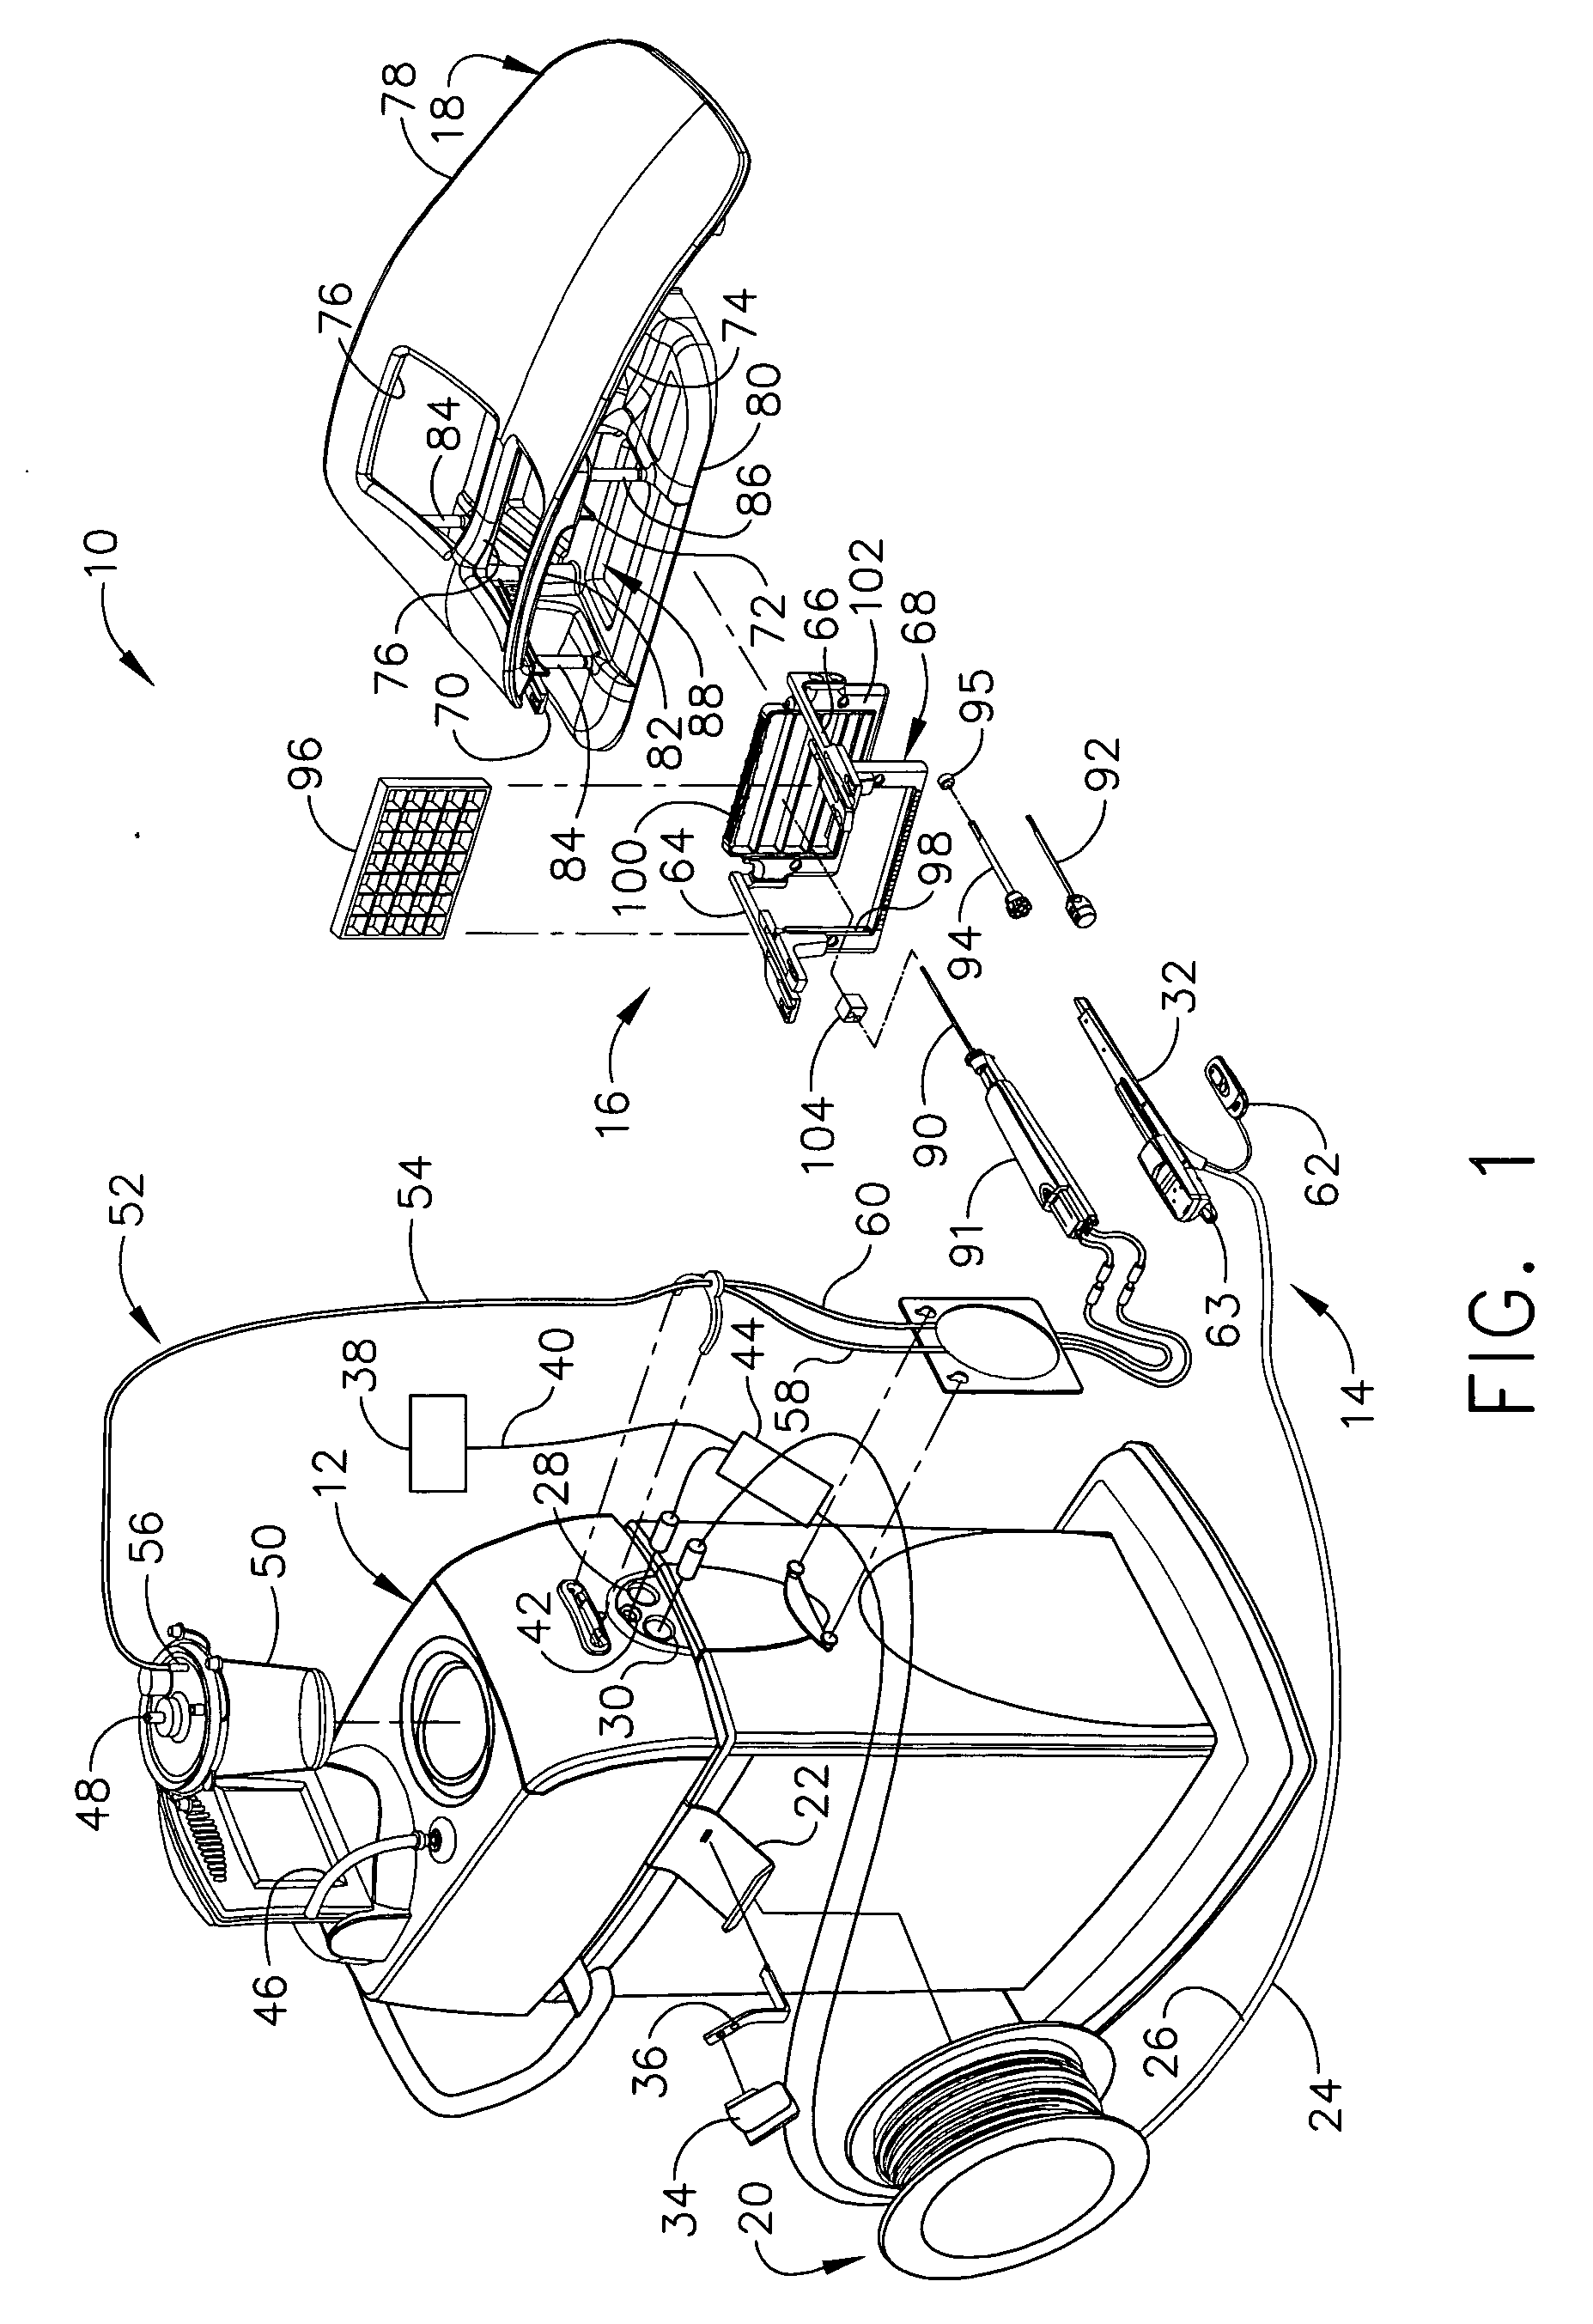 Grid and rotatable cube guide localization fixture for biopsy device